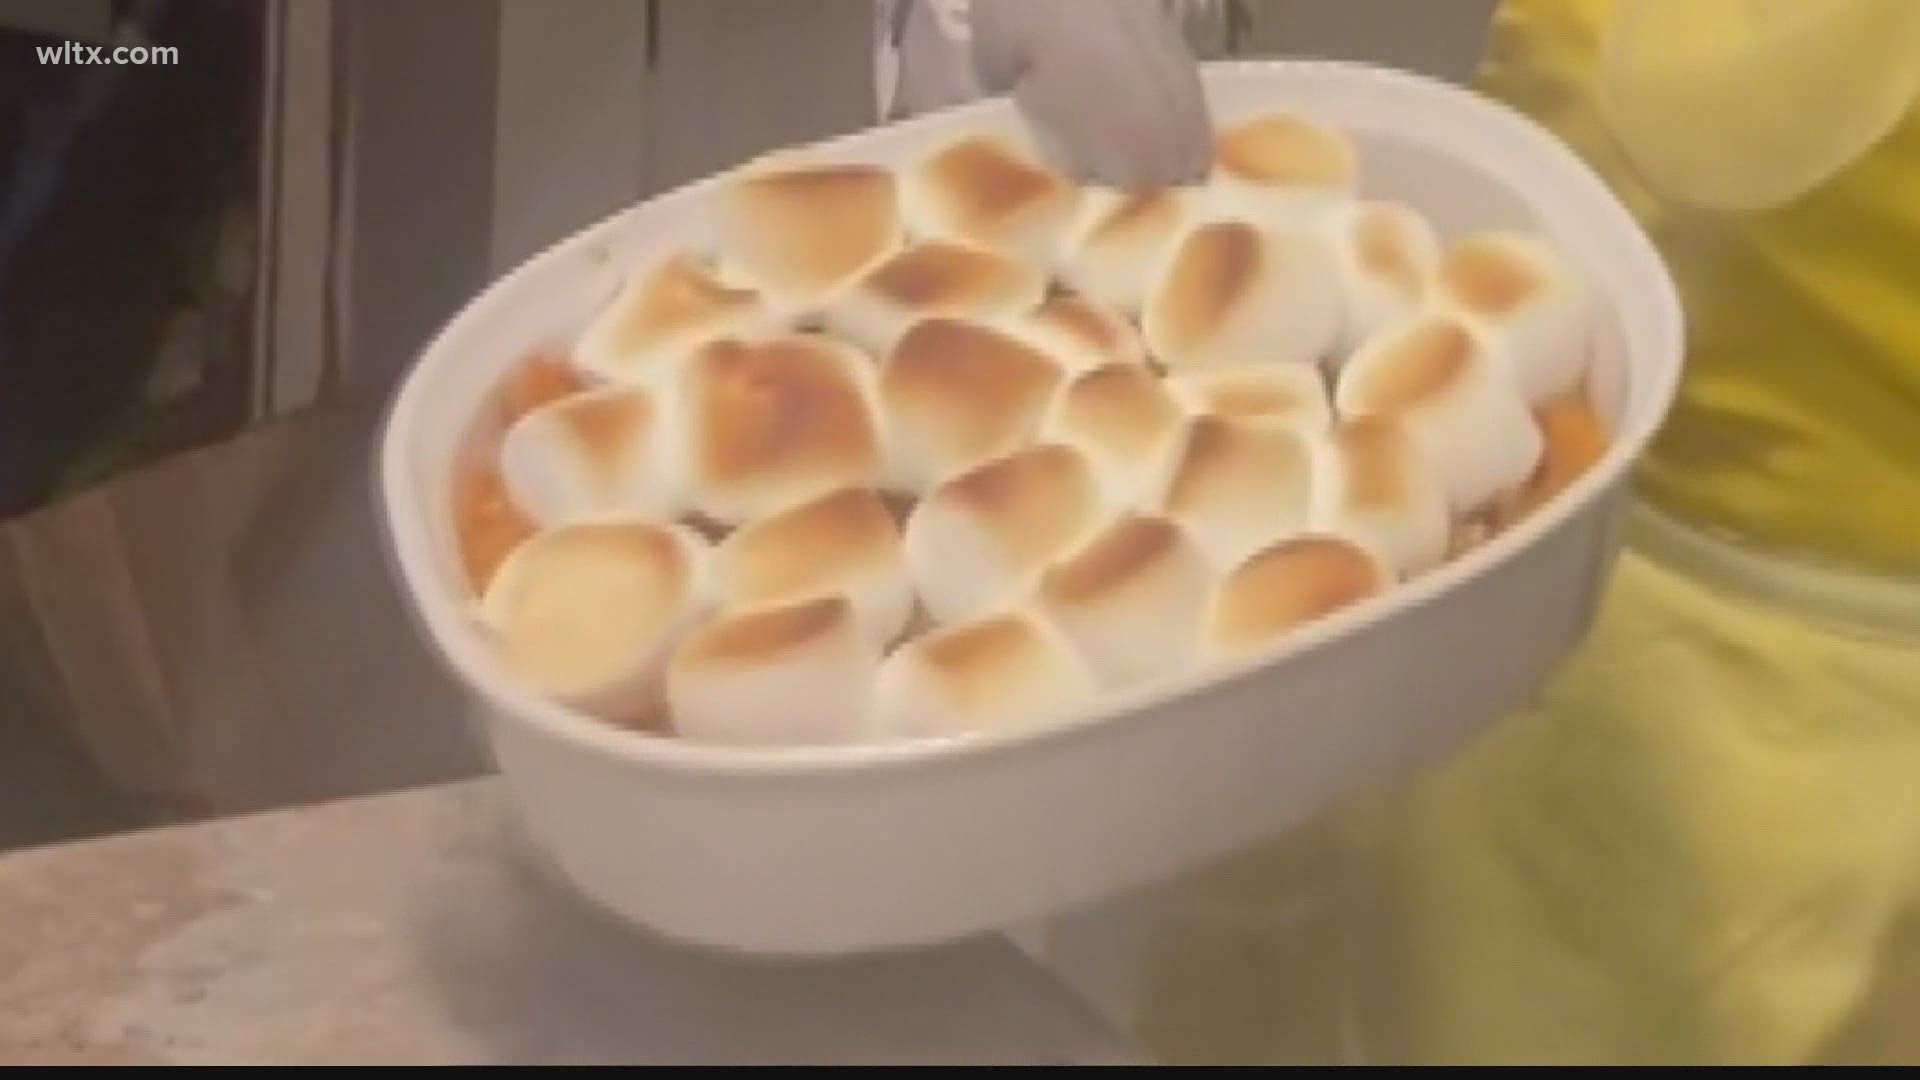 News19's Andrea Mock walks you through how to make her sweet potato surprise casserole, so you can add it to your Thanksgiving menu.